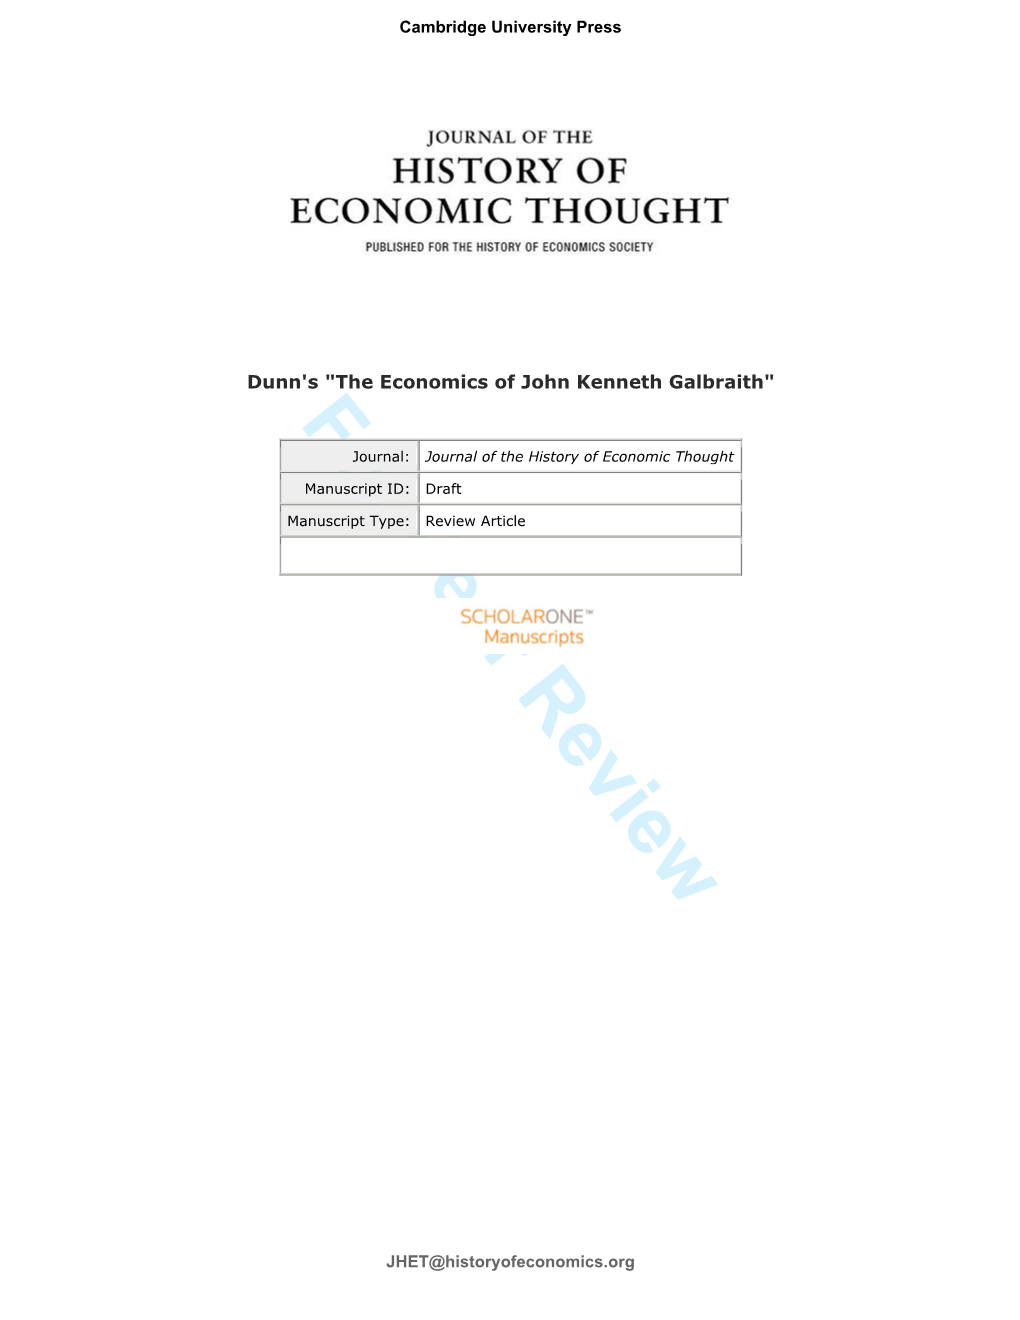 For Peer Review Journal: Journal of the History of Economic Thought